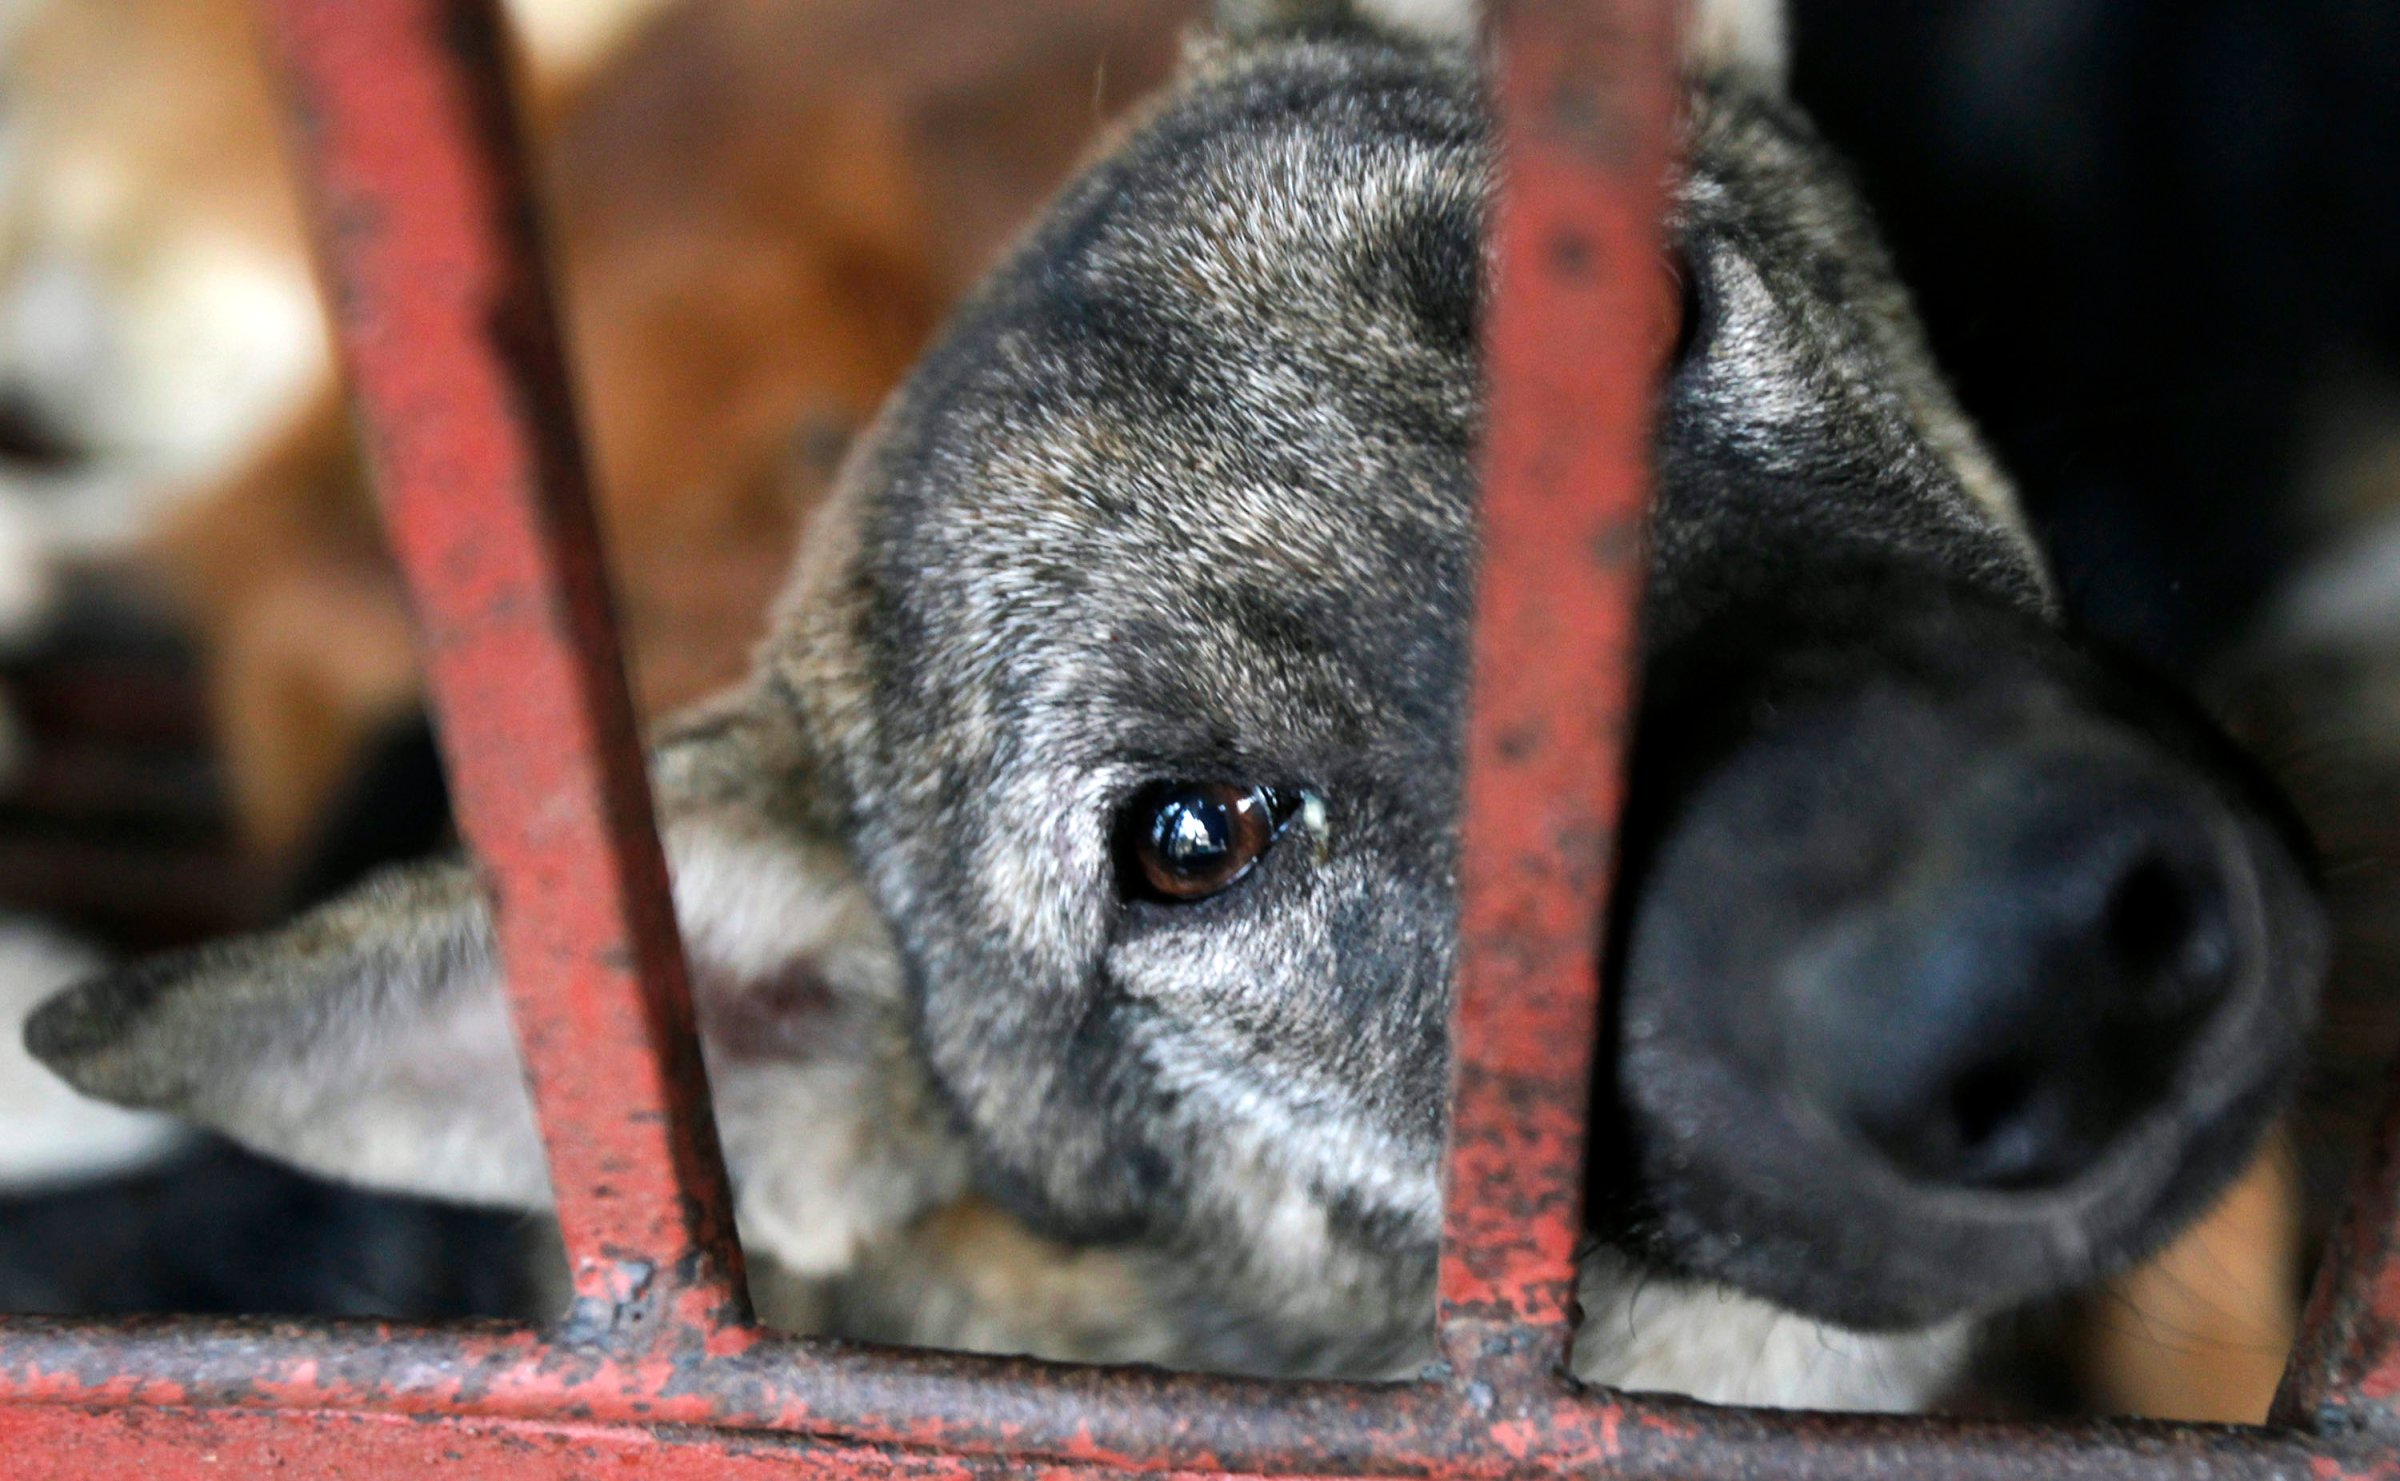 A dog waits to be slaughtered for sale as food in Duong Noi village